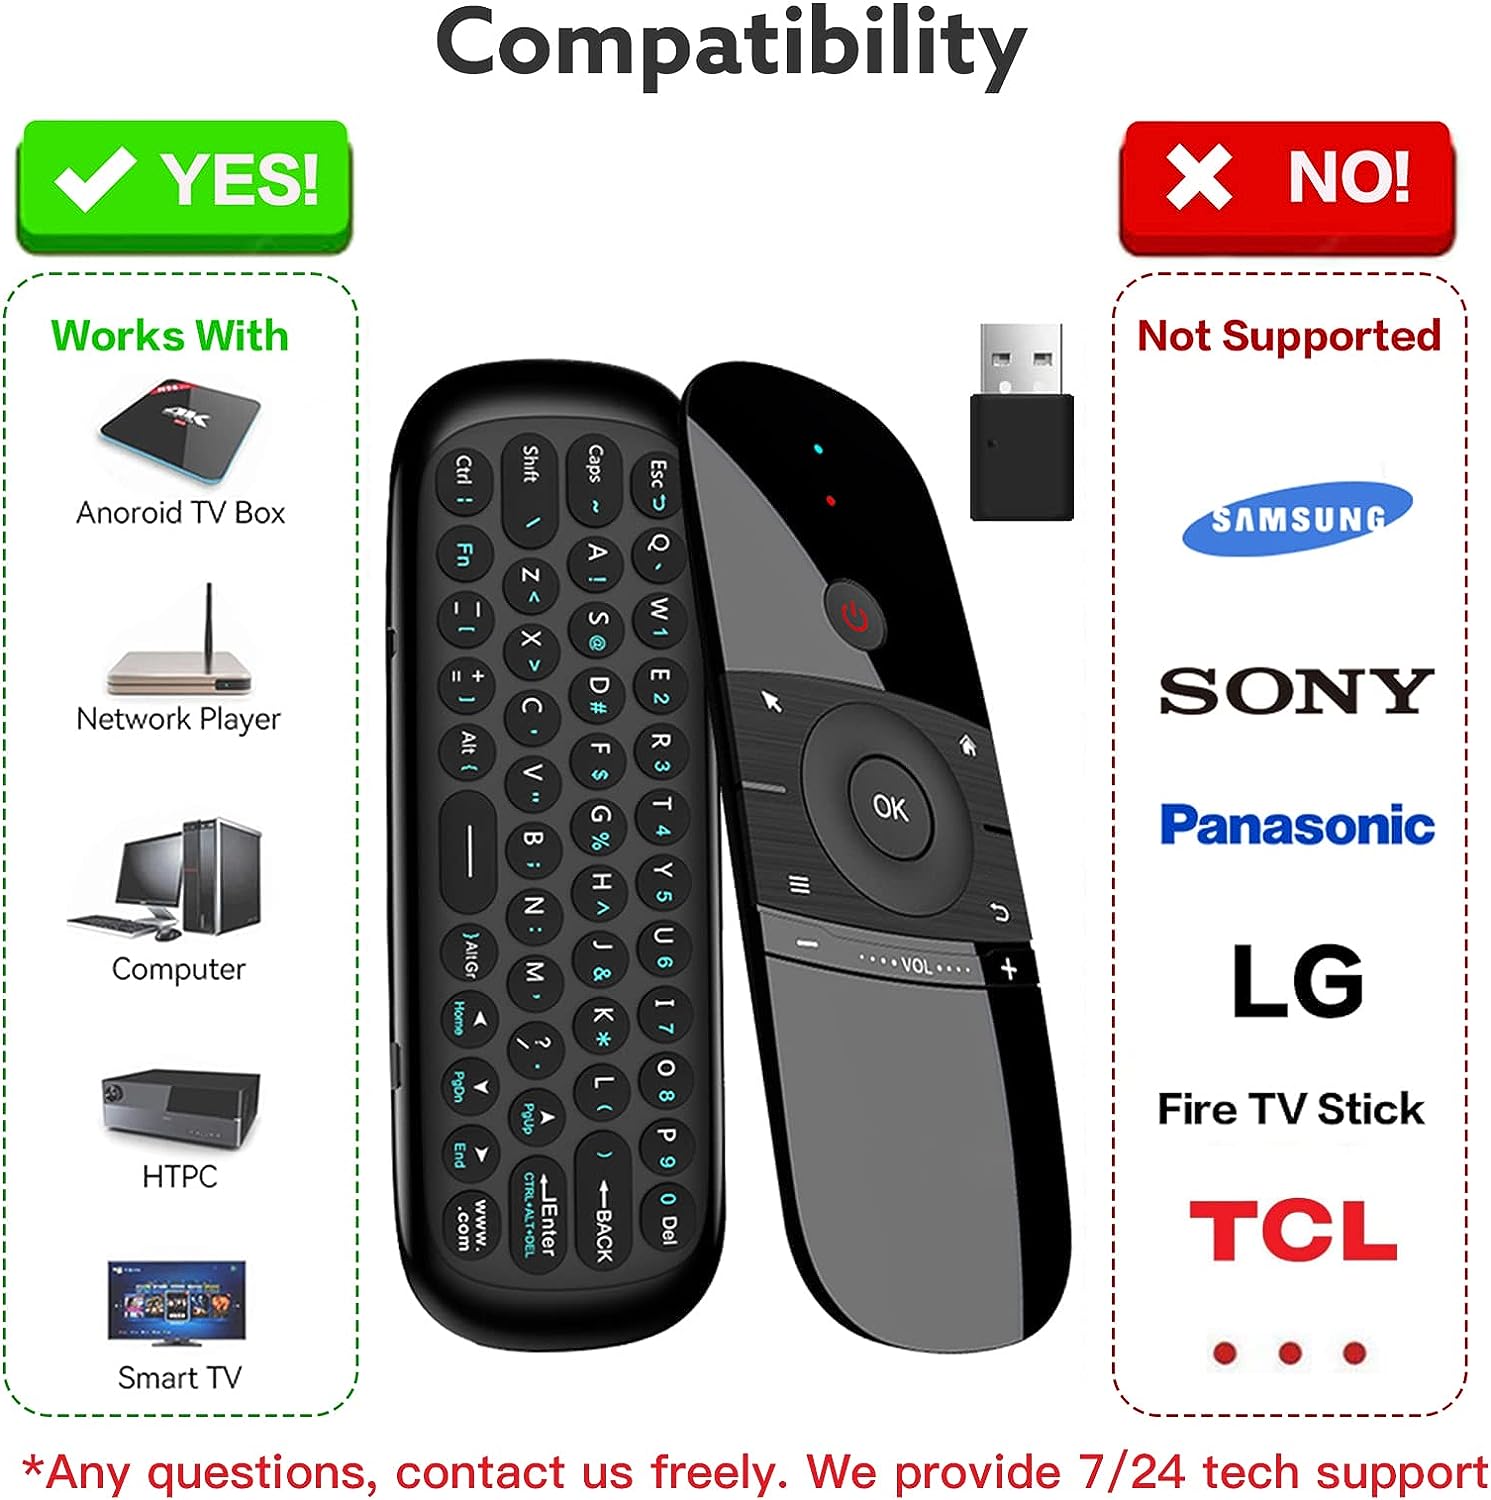 WeChip W1 Remote, Air Mouse Remote, Universal TV Remote, 2.4G Wireless Keyboard Multifunctional Remote Control for Nvidia Shield/Android TV Box/PC/Projector/HTPC/All-in-one PC